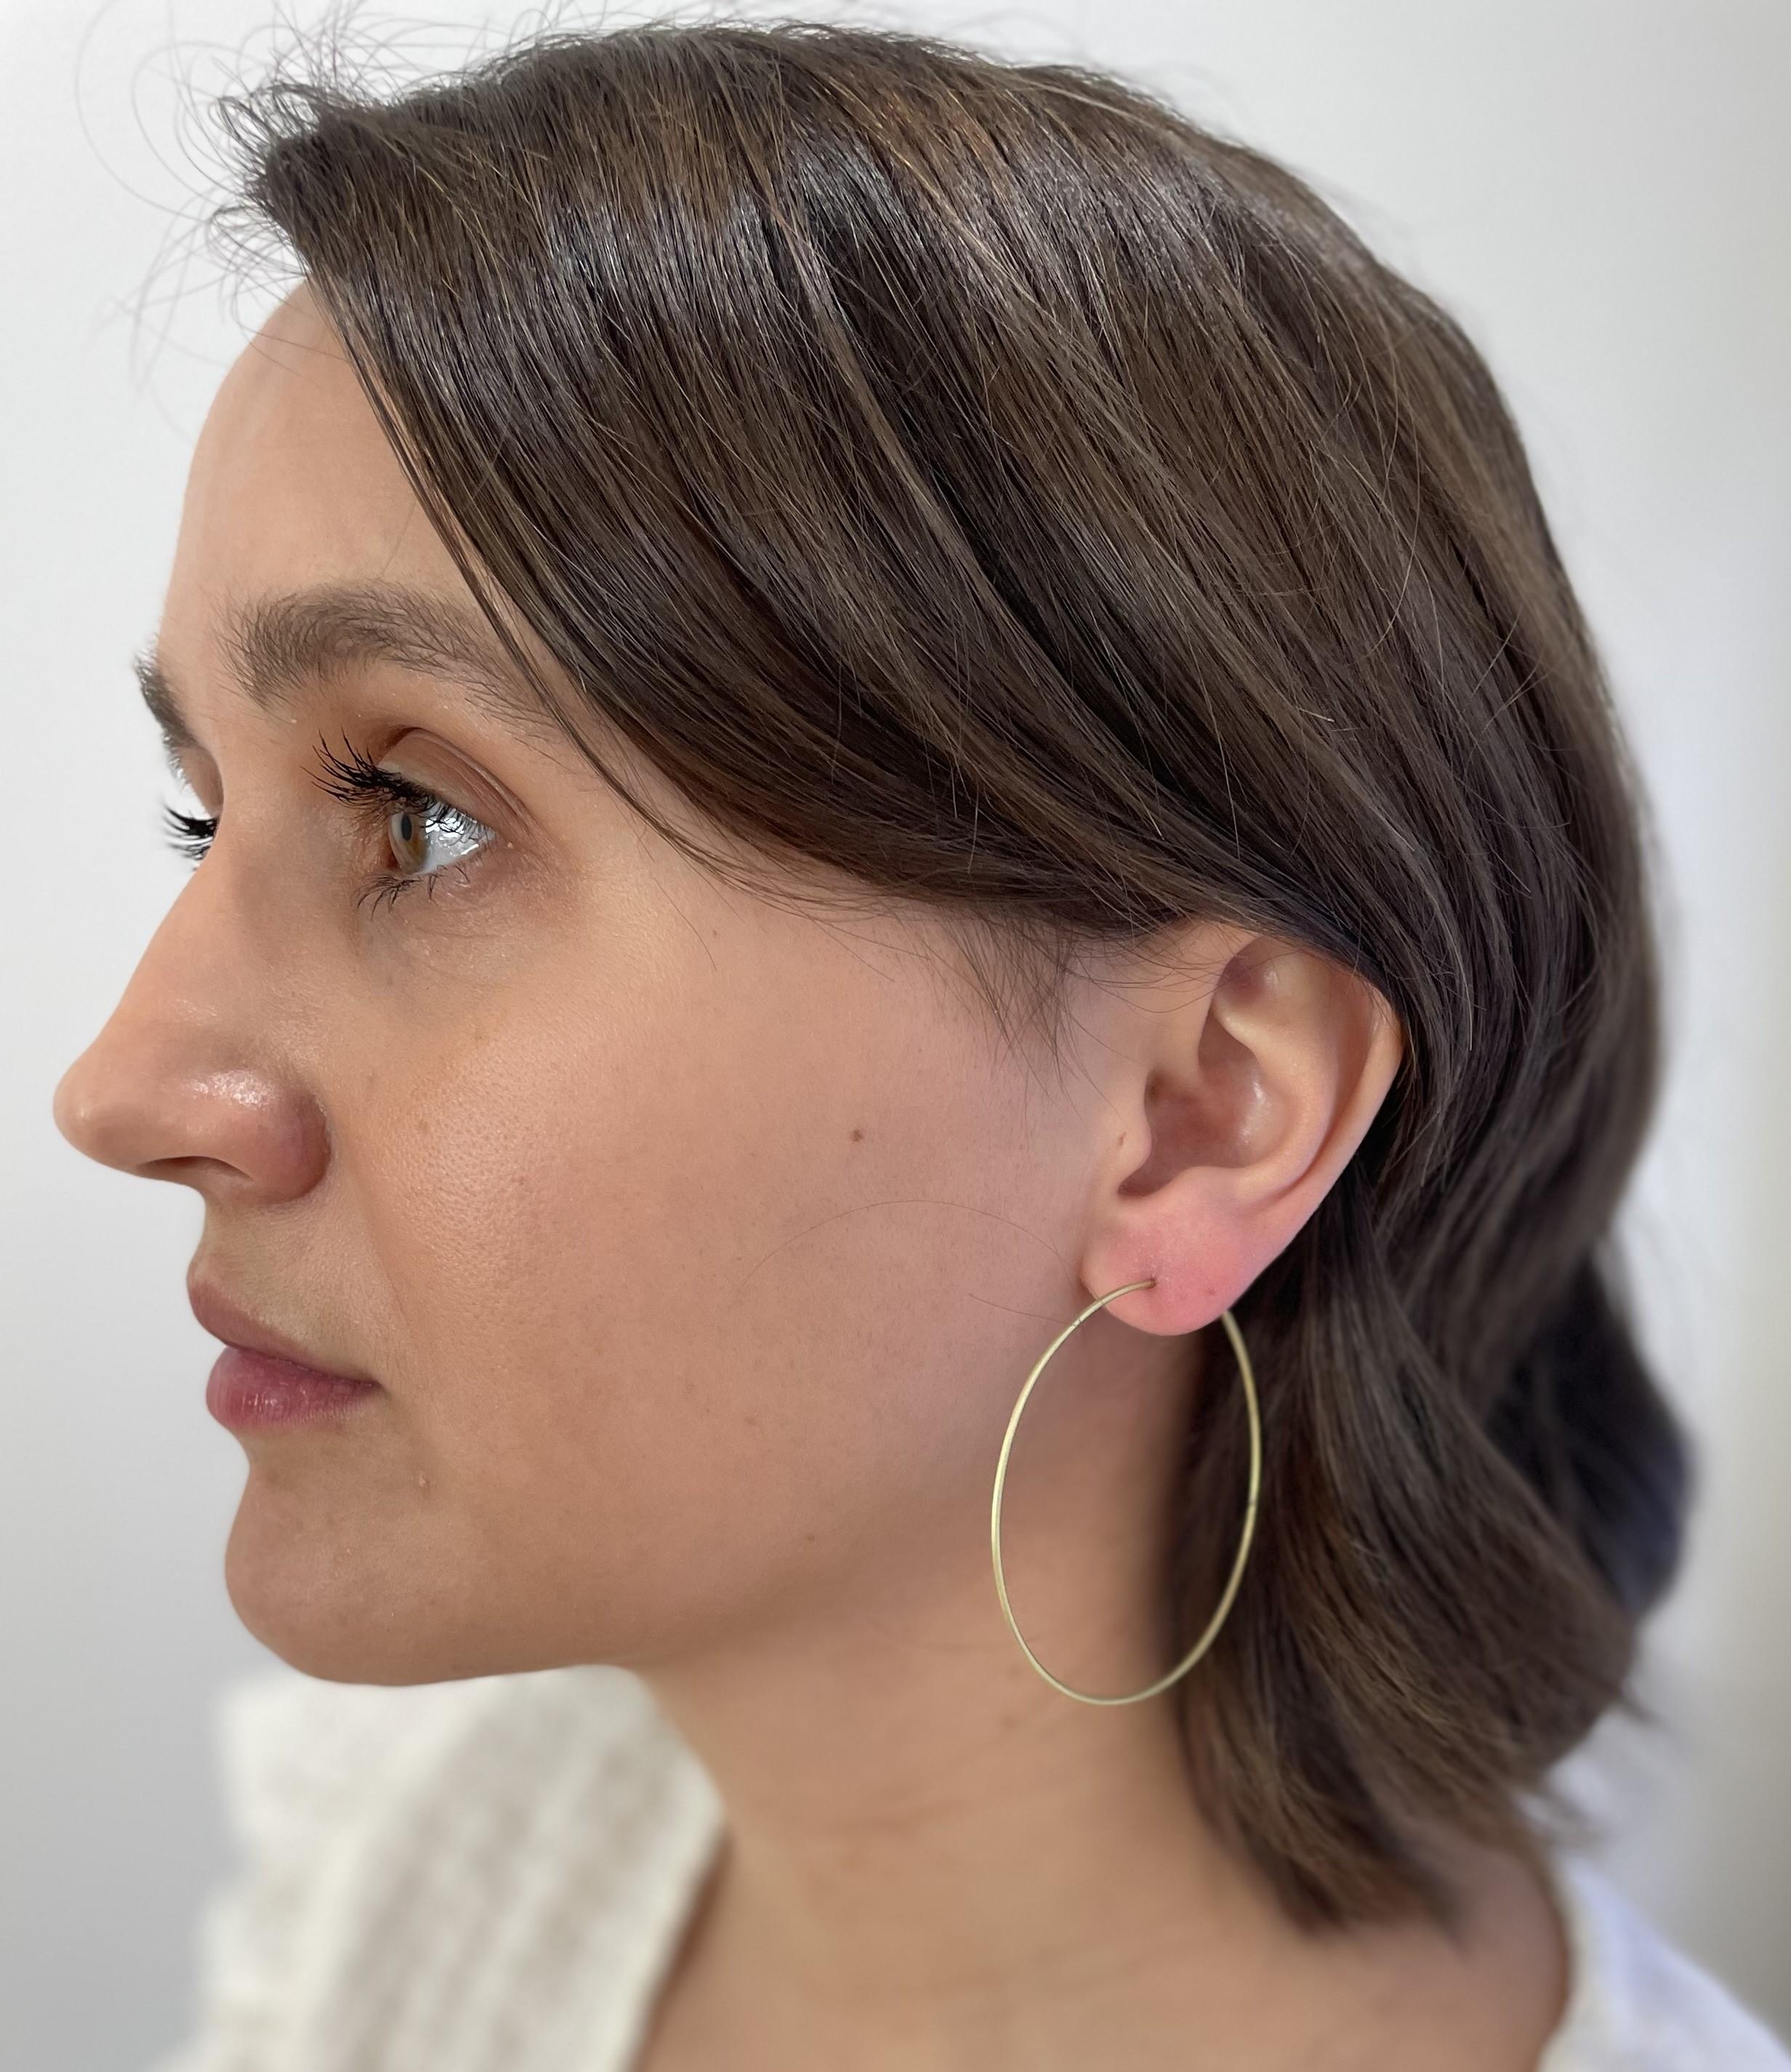 Faye Kim's 18 Karat Gold handmade wire hoops are a must-have for every jewelry wardrobe. Casual, chic and wearable every day, the hoops give endless opportunities to change your look with different drops, sold separately.

Hoops: 2